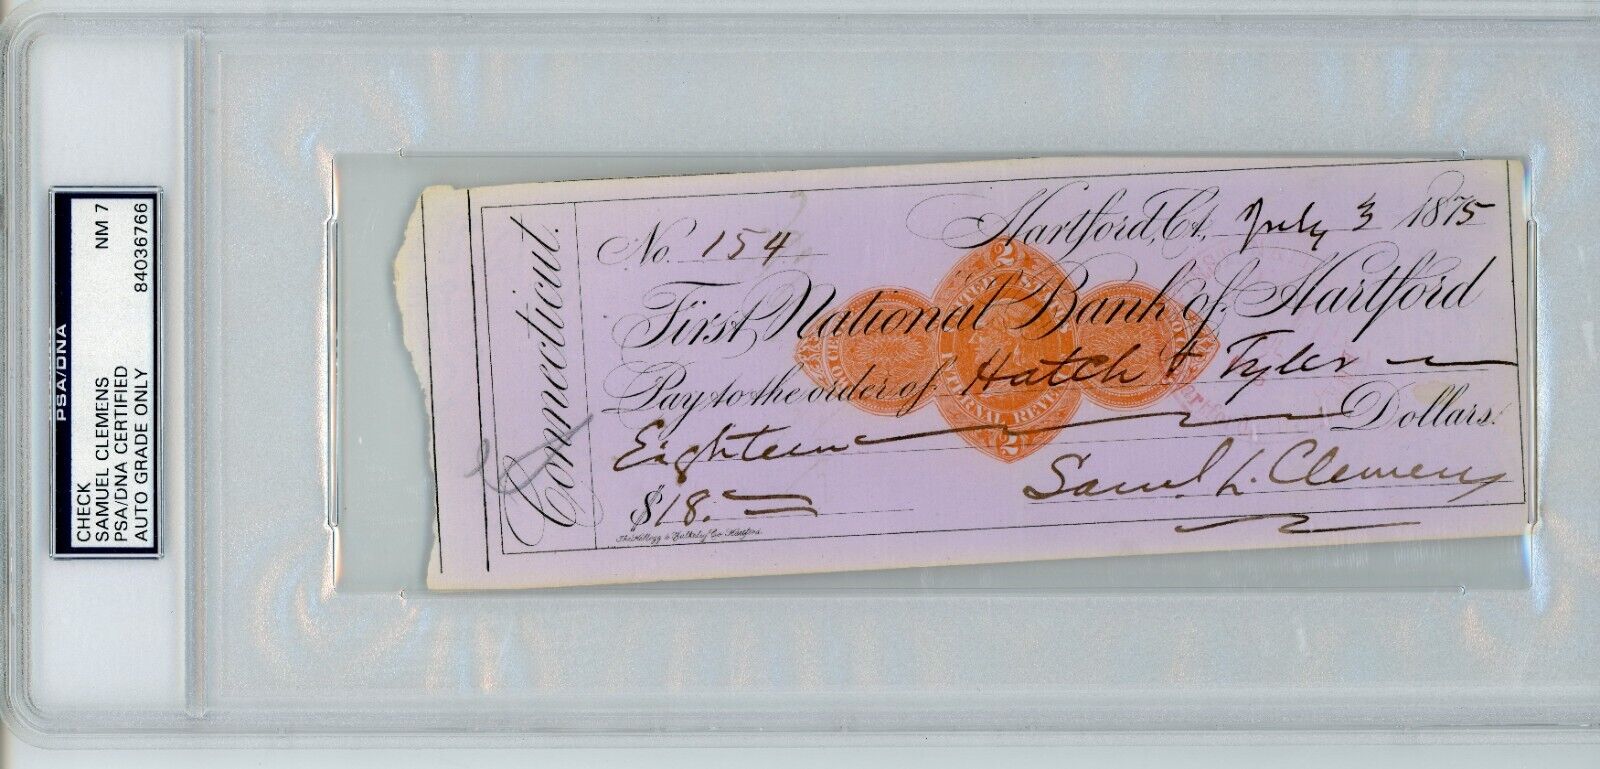 Mark Twain (Samuel L. Clemens) ~ Signed Autographed Personal Check ~ PSA DNA